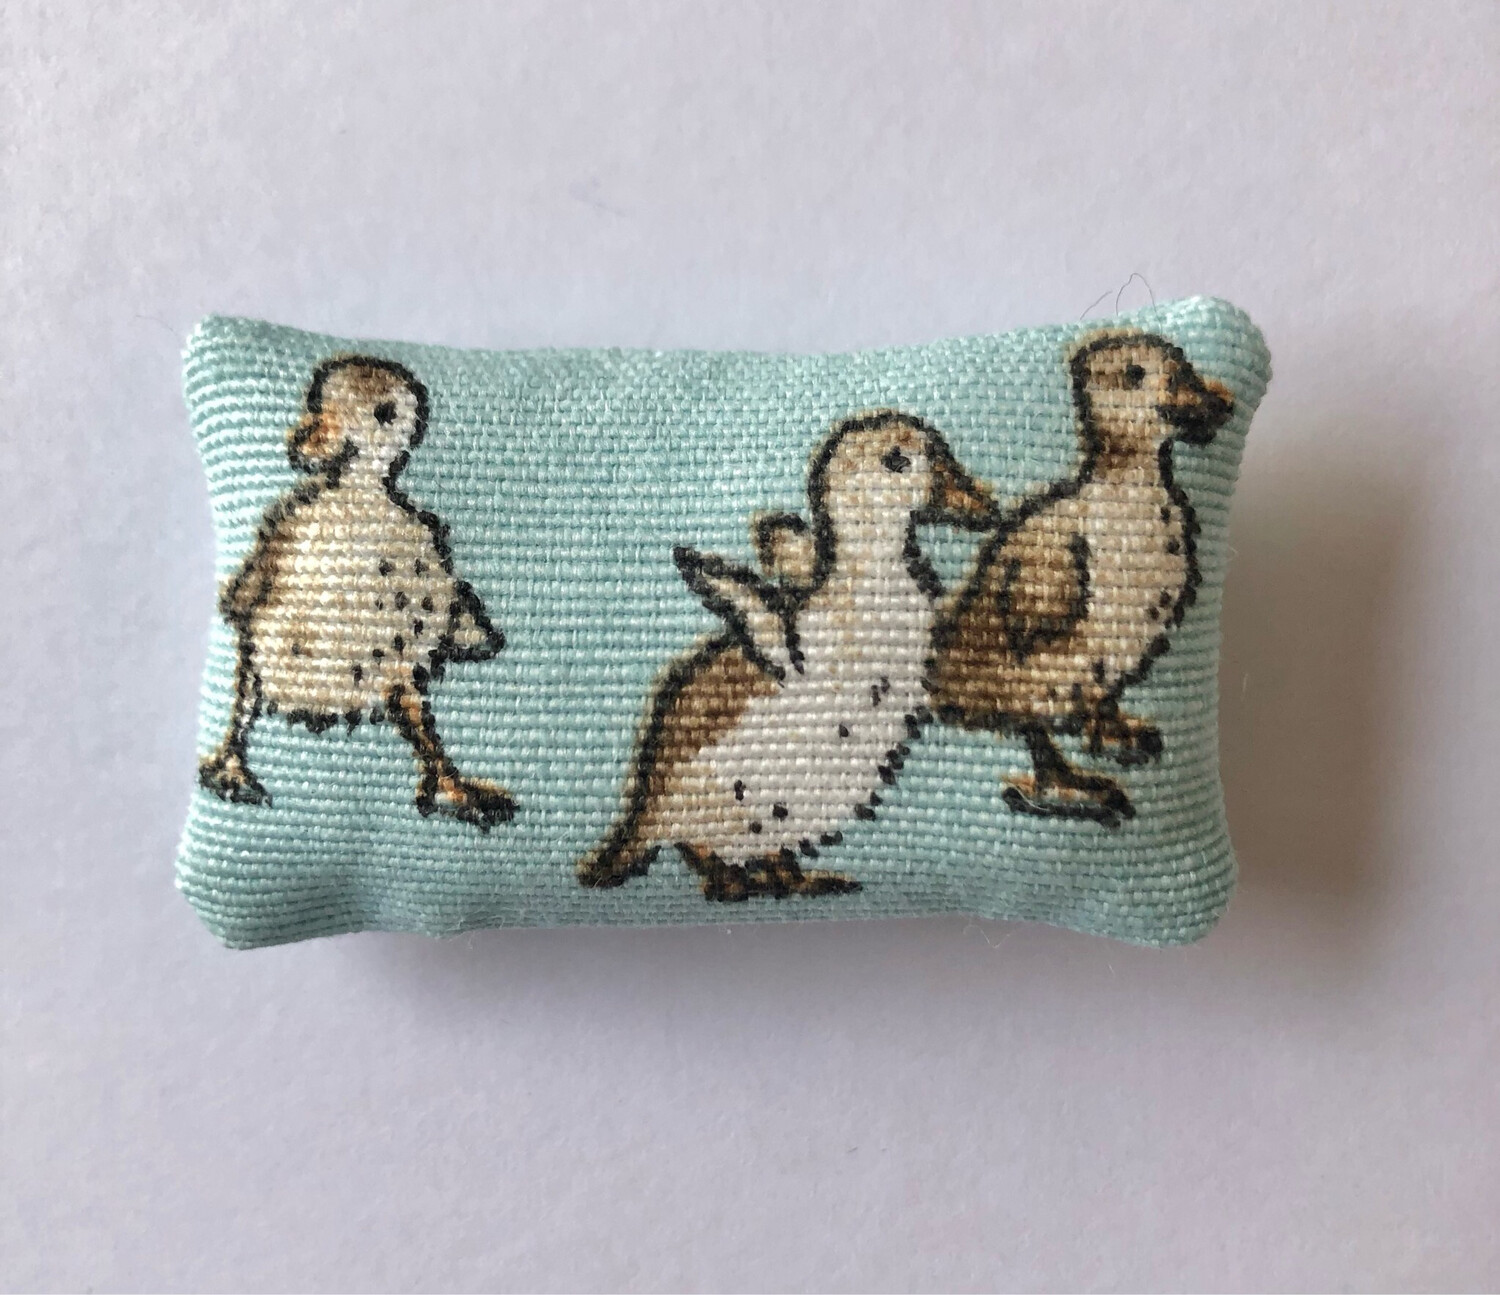 1:12 scale Duckling cushion for dolls house